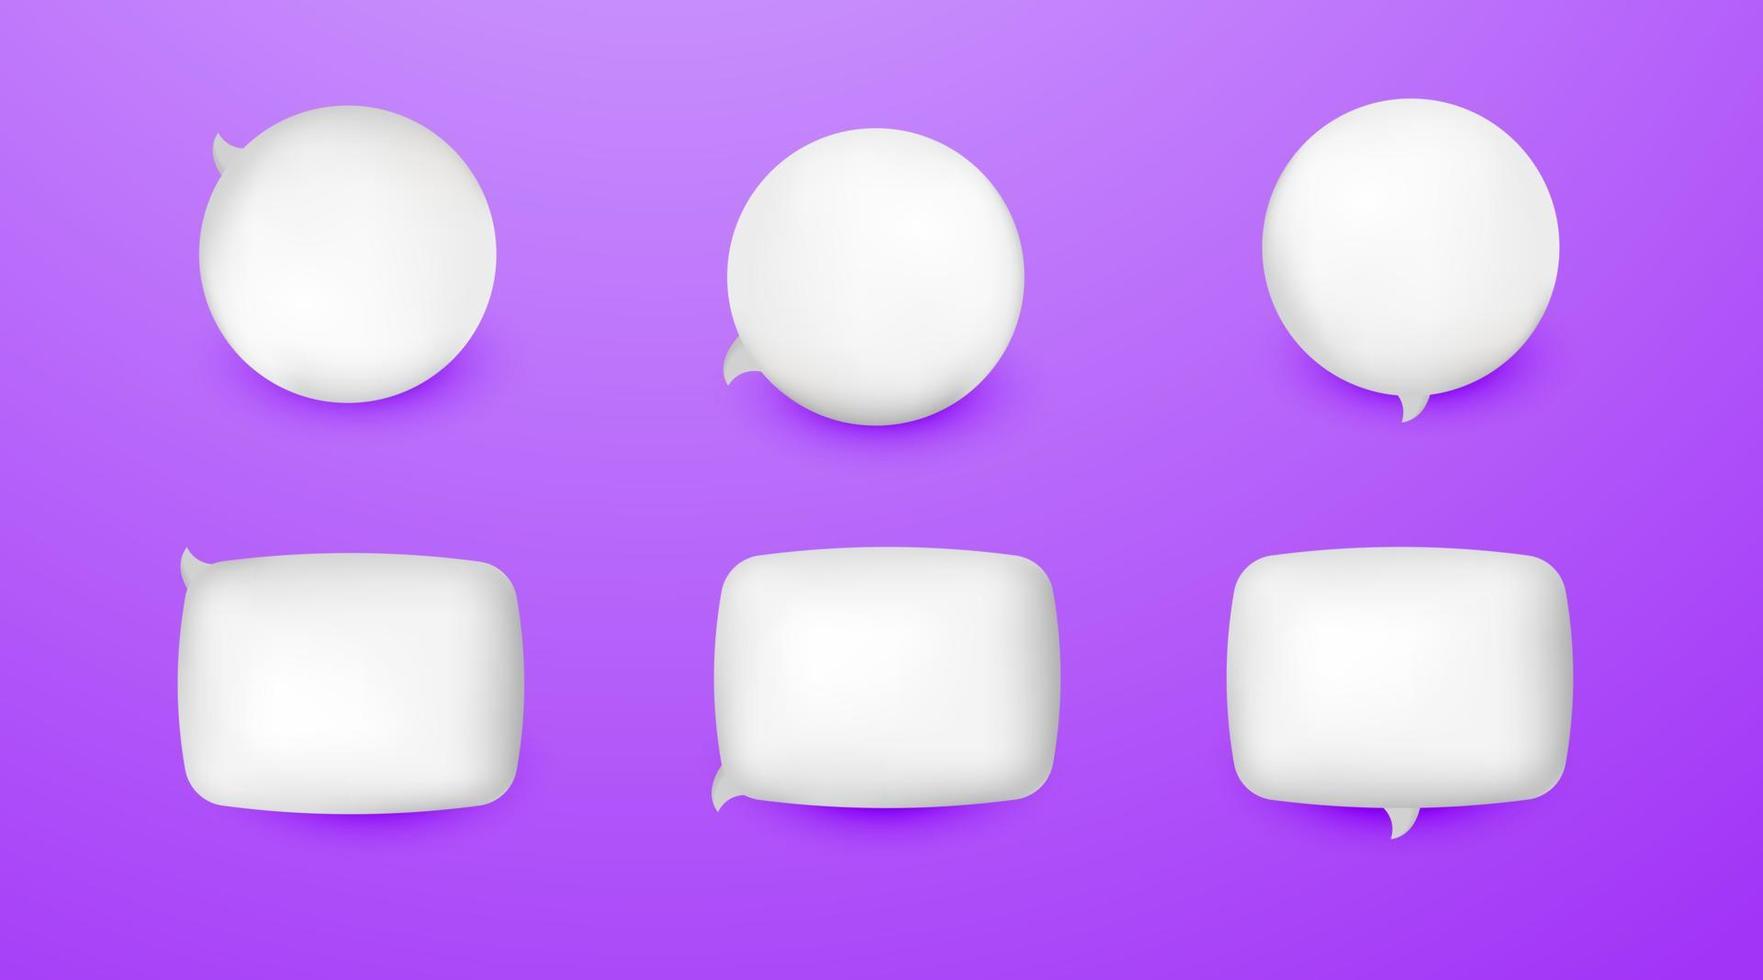 Set of cute 3d white speech bubble icon isolated on purple pastel background vector